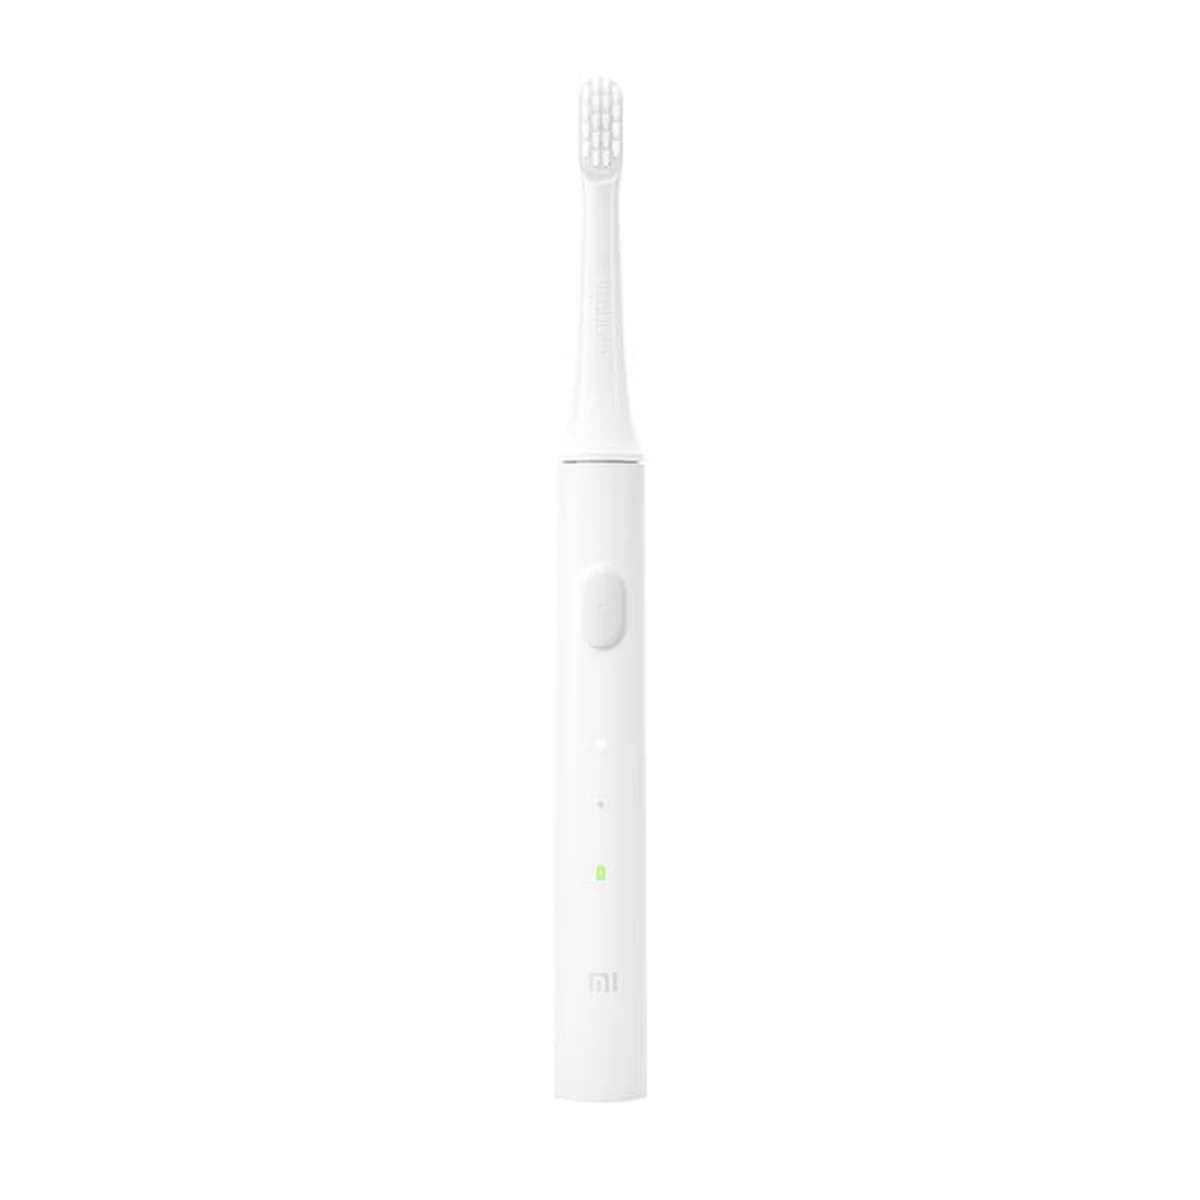 Xiaomi Mijia T100 Sonic Electric Toothbrush Smart Electric Toothbrush USB Charging IPX7 Waterproof Multiple Colors Available